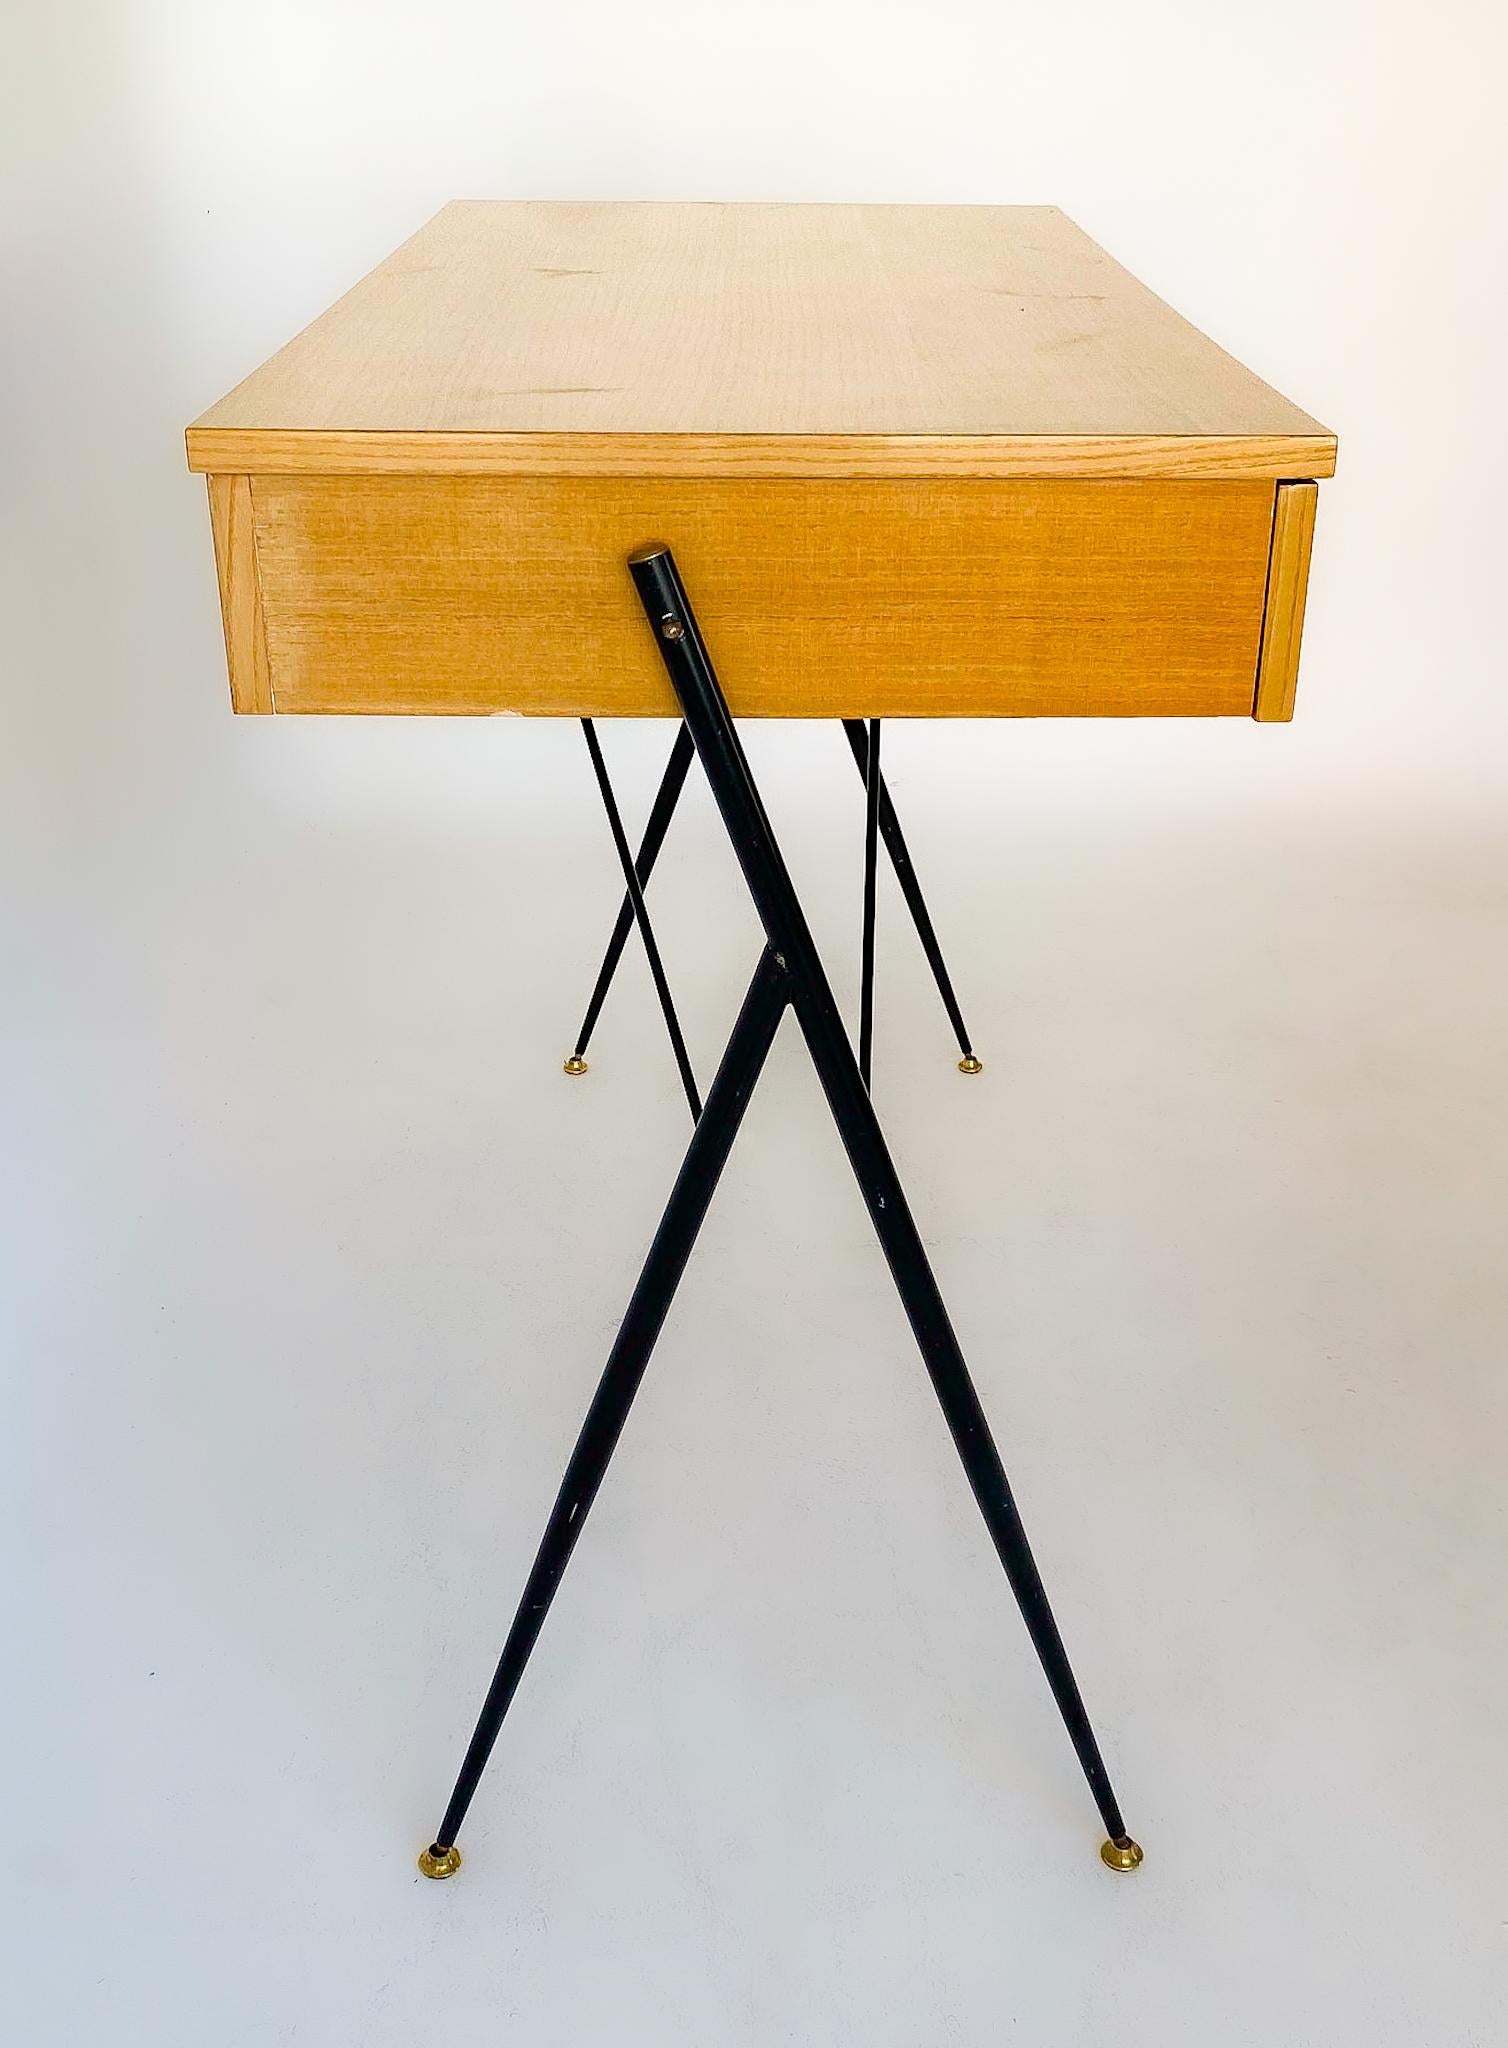 Mid-Century Modern Brown Wooden Brass Desk in the style of Silvio Cavatorta, Italy 1950s.

Very rare Italian desk and writing table produced in the 50s in the style of Silvio Cavatorta. The light brown wooden desk with a lacquered surface features